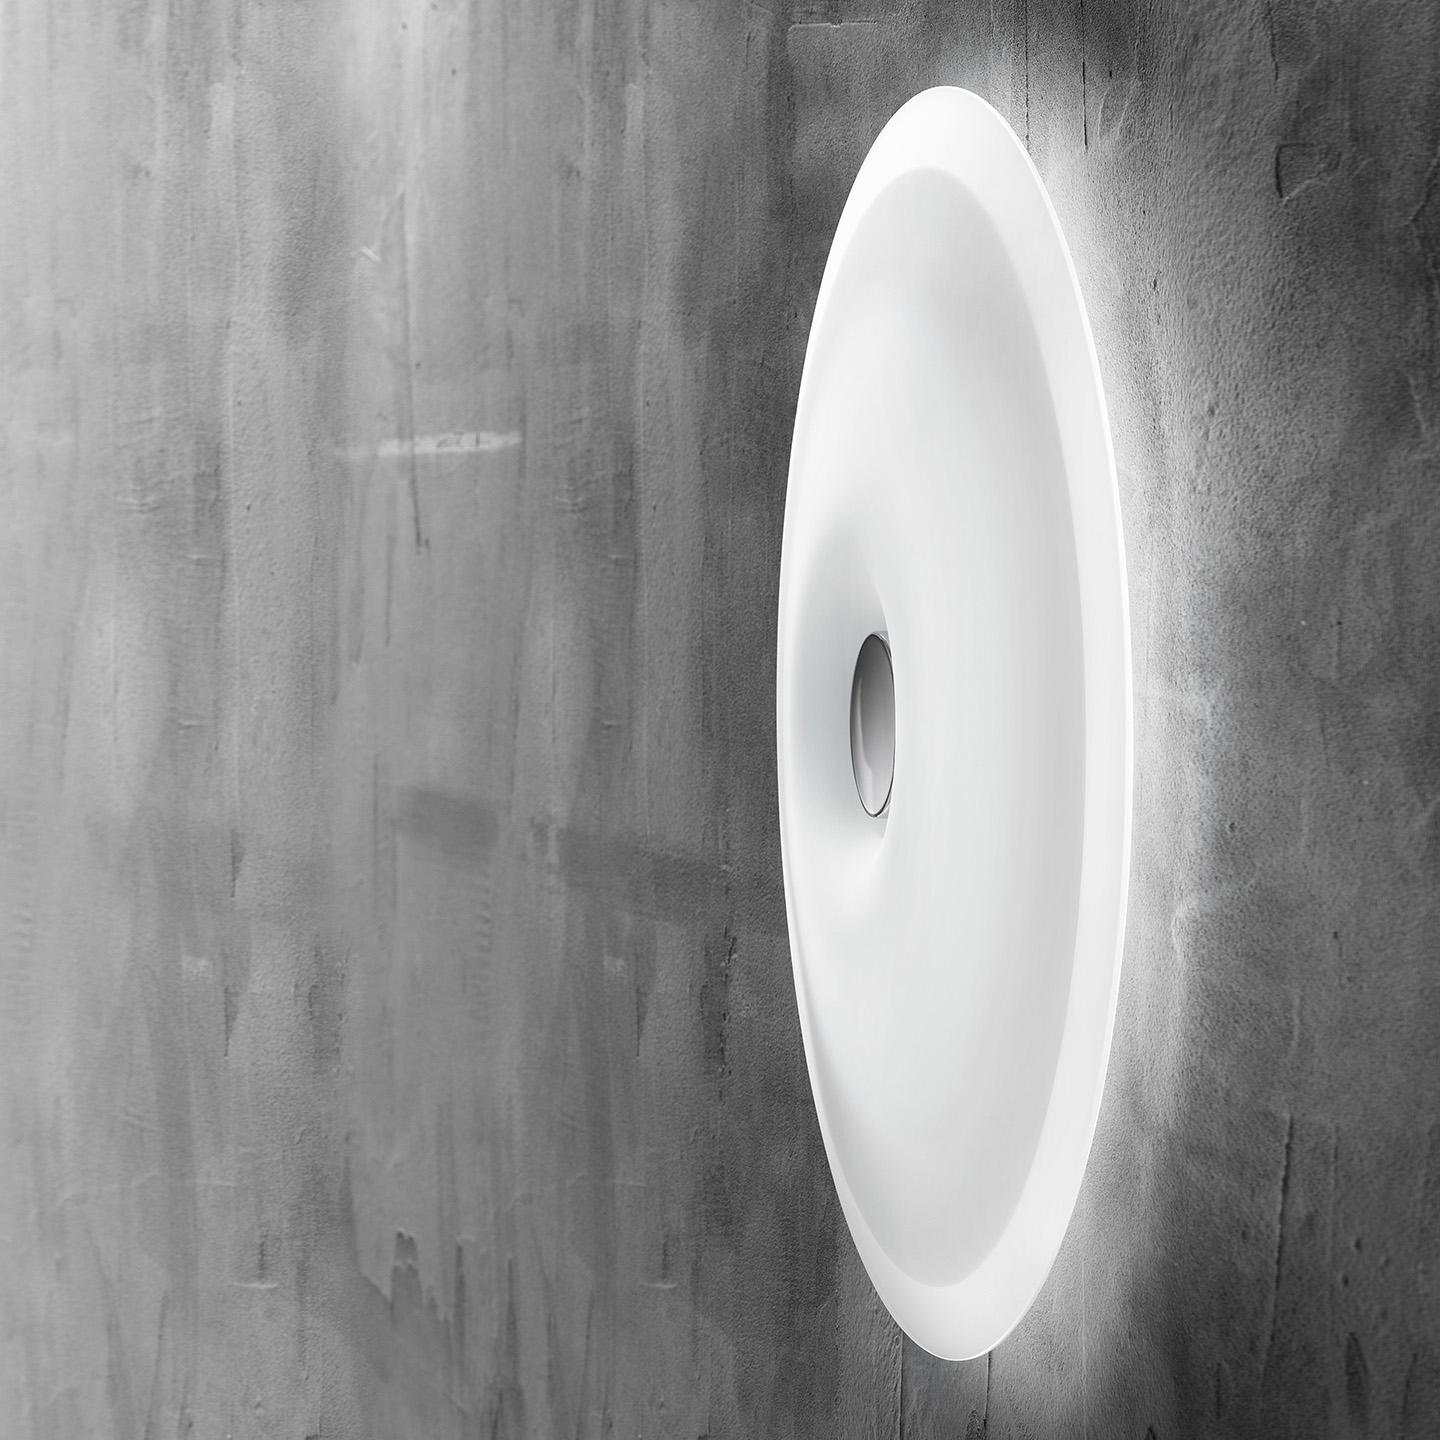 Planet is a versatile and elegant ceiling or wall lamp designed in 2008 by Leucos Design Lab. It is an iconic lamp with a serigraphic white glass diffuser and a translucent edge that creates the perfect balance of light. Planet’s structure is white